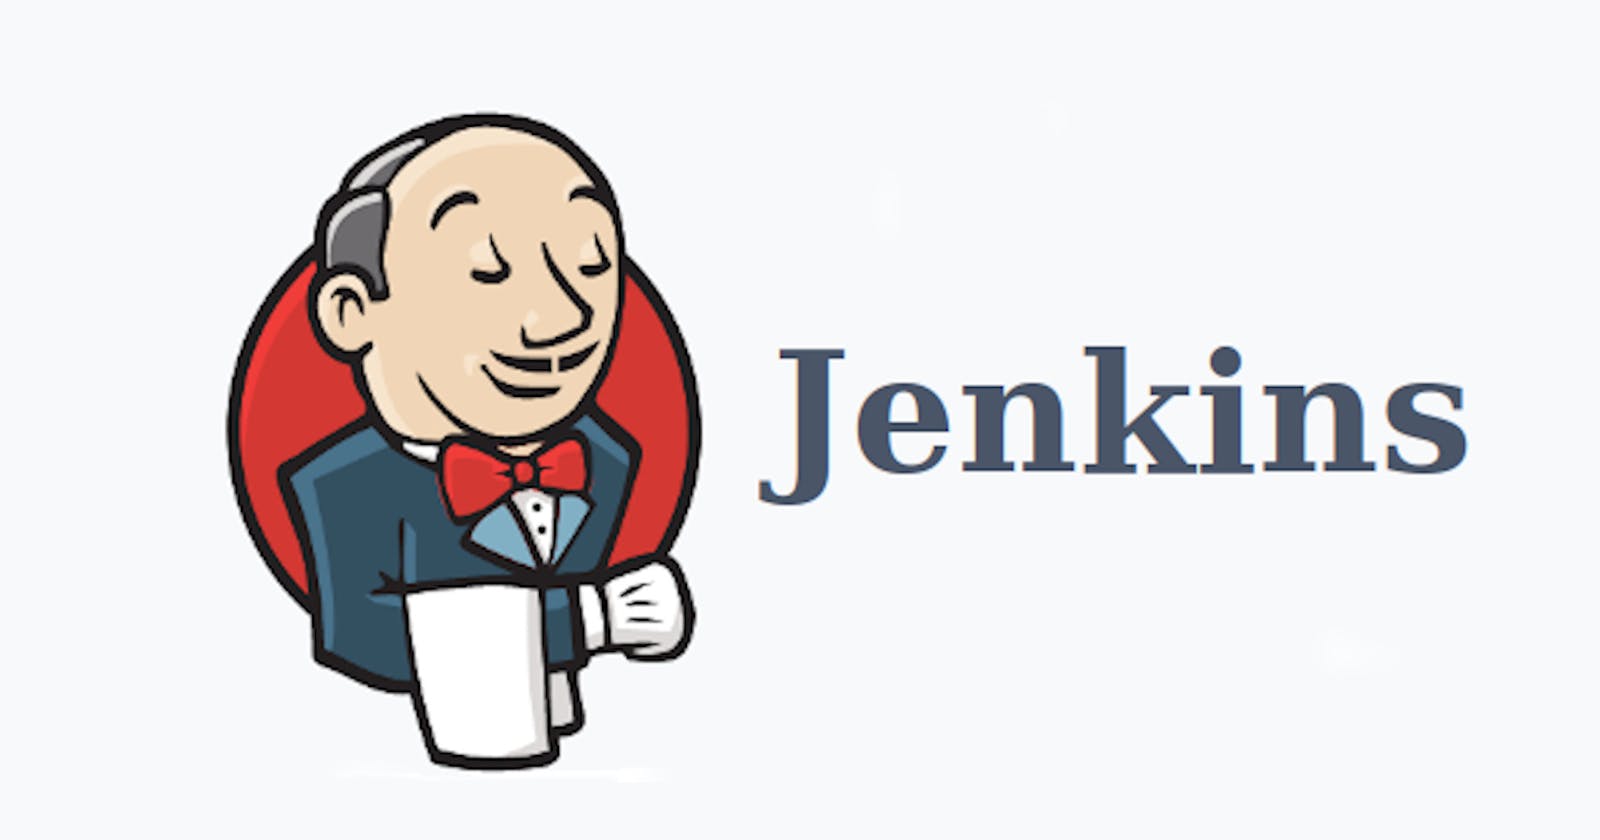 Day-22: Getting Started with Jenkins 😃